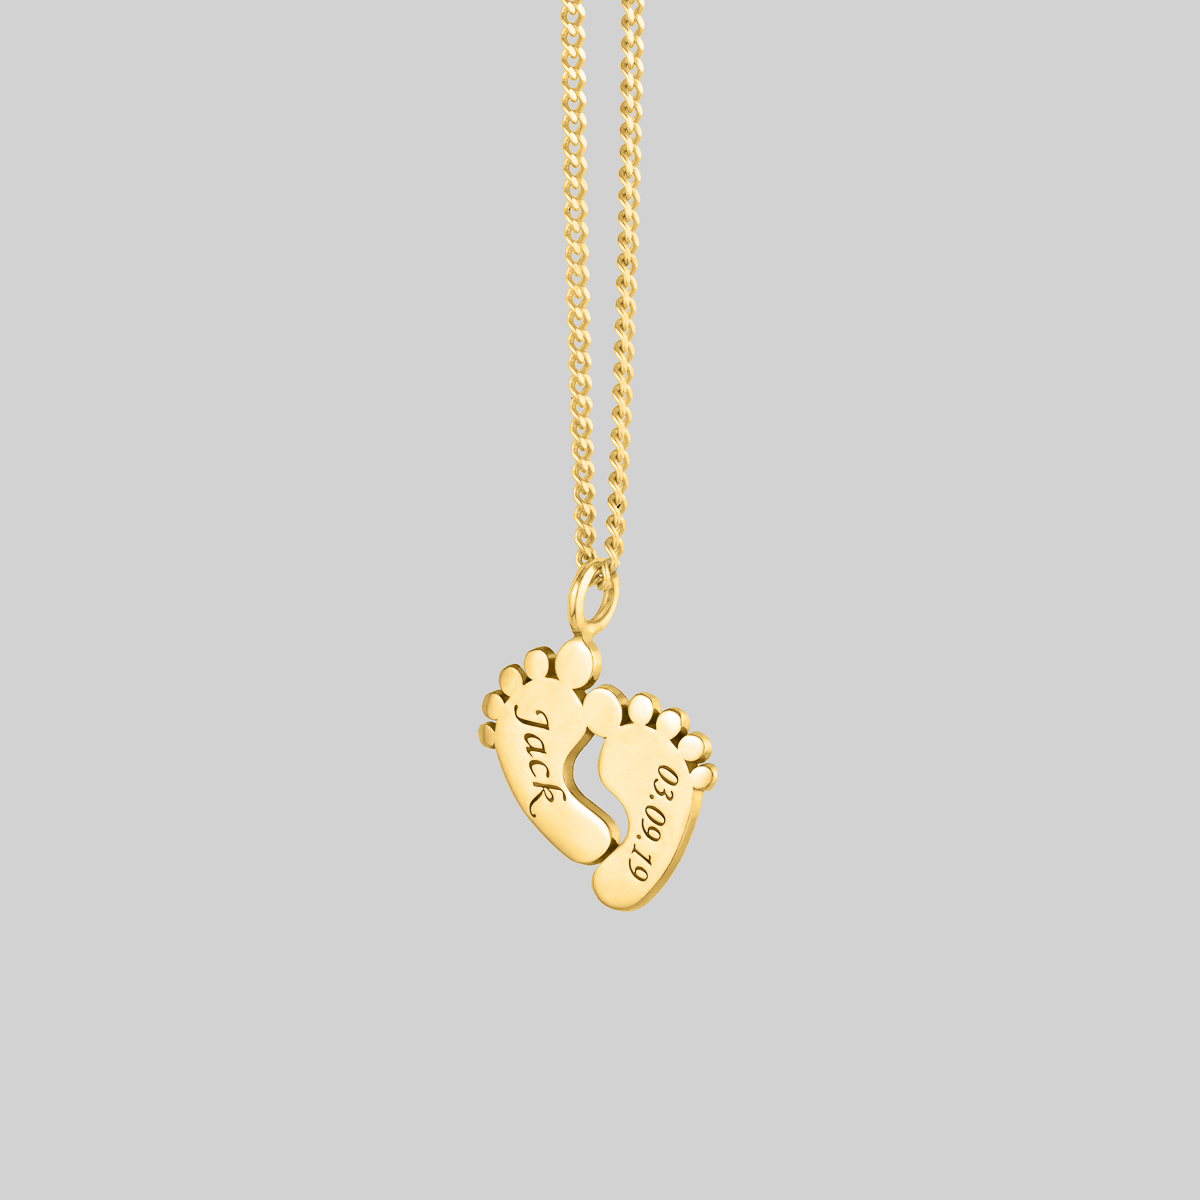 Personalized Sterling Silver Gold Plated Bar Necklace with Baby Feet Cutout 